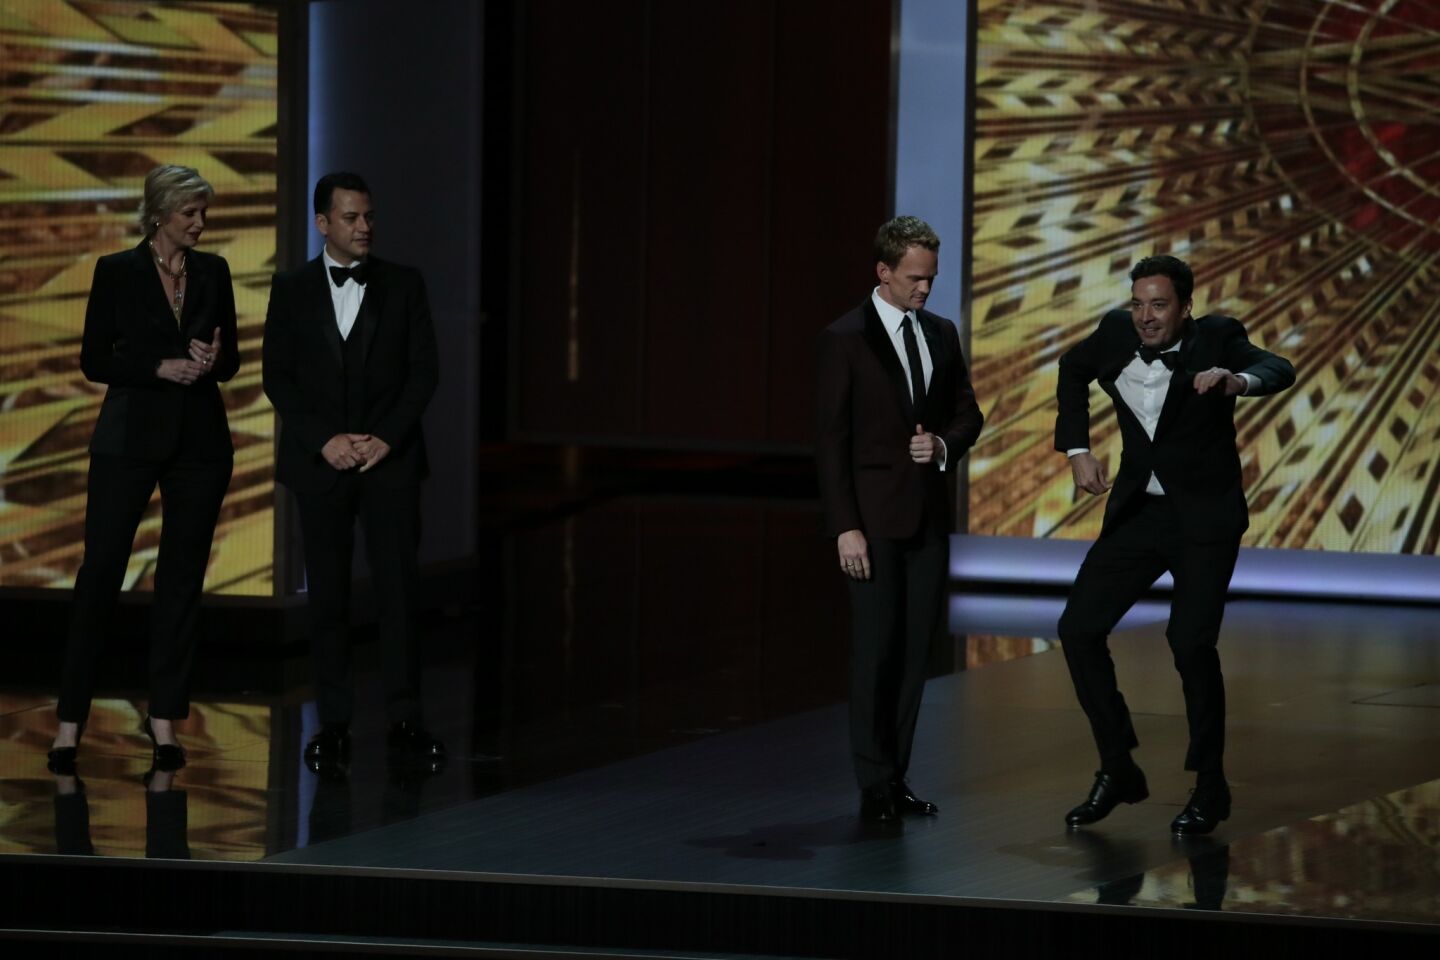 After several sterling Tony Awards hosting jobs, everyone seemed primed to see him bring that same magic to the Emmys. Sadly, NPH (second from right) is only a mortal. Same as you and me. And like you and me, he stumbled his way through an awkward and interminable opening film and monologue that was extended to painfully unfunny lengths through the addition of four former Emmy hosts (including, from left, Jane Lynch, Jimmy Kimmel and Jimmy Fallon).